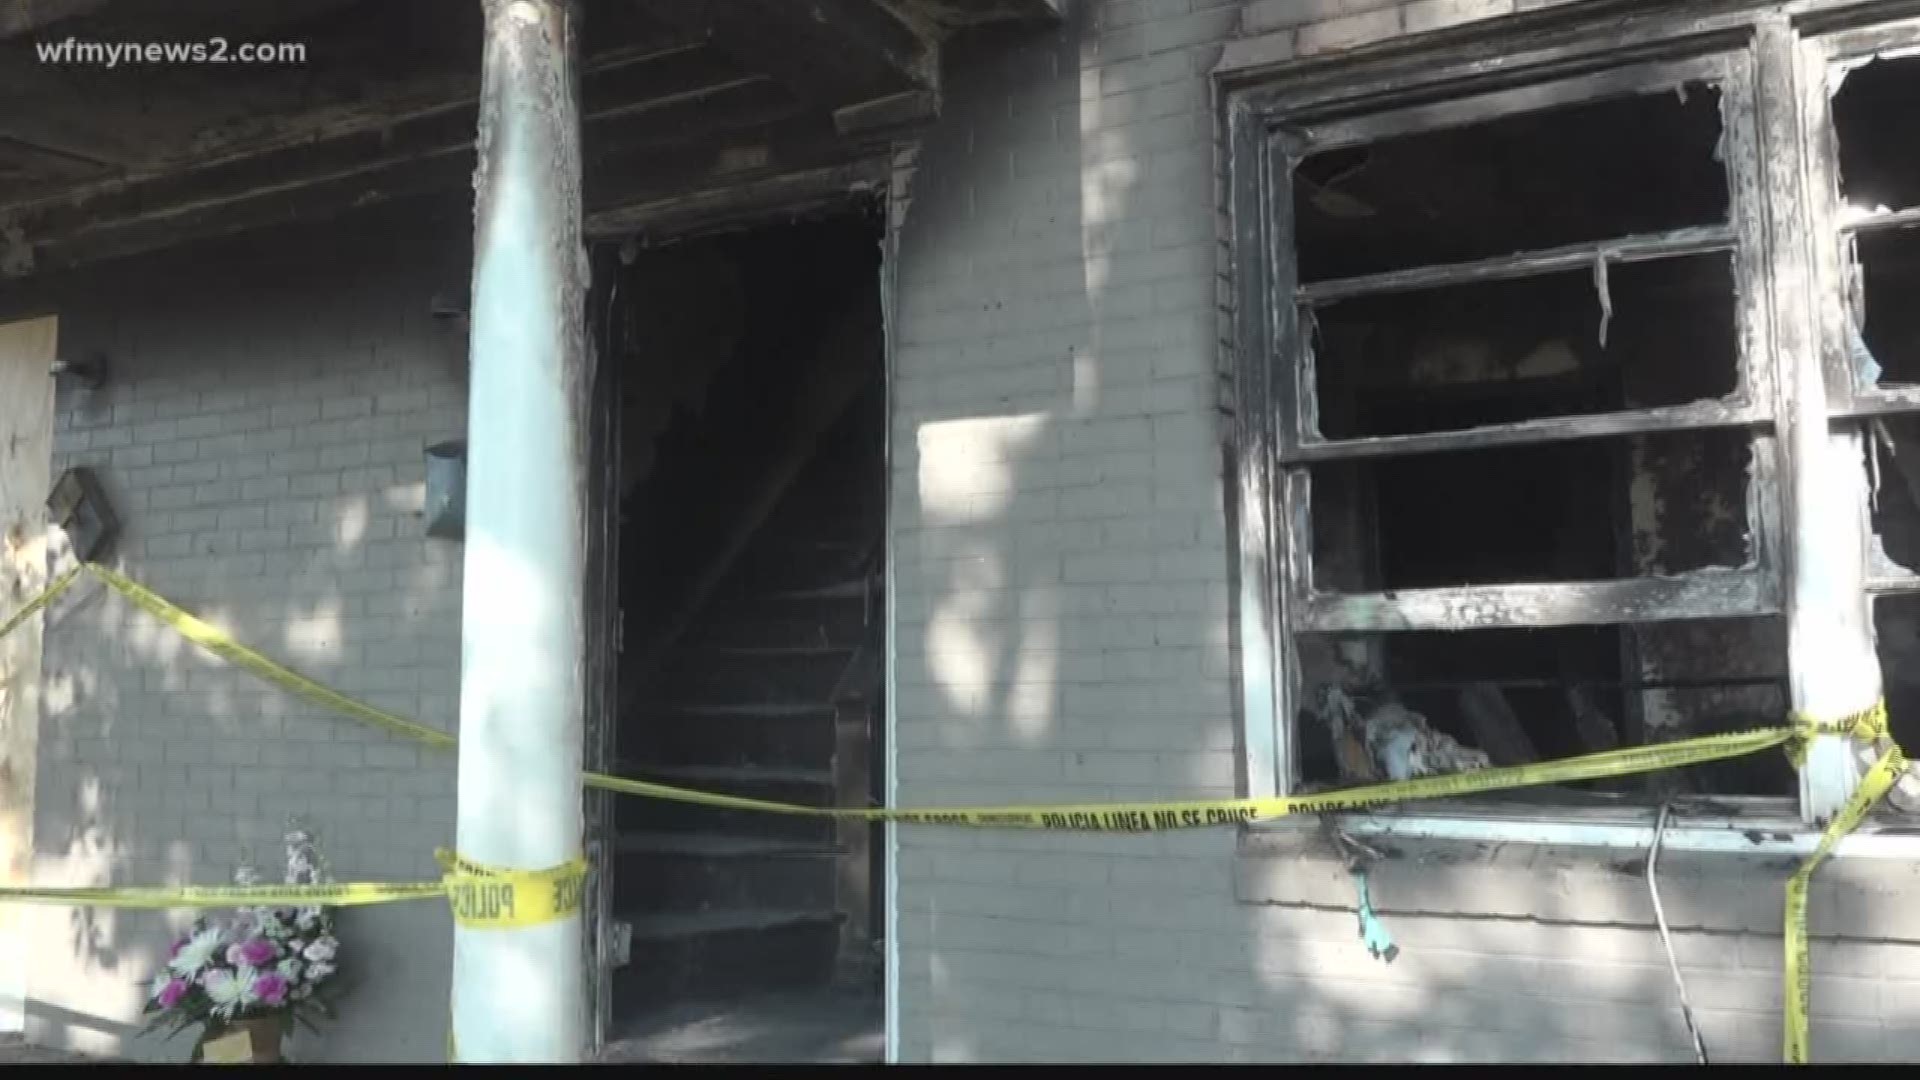 5 Children Die After House Fire In Greensboro